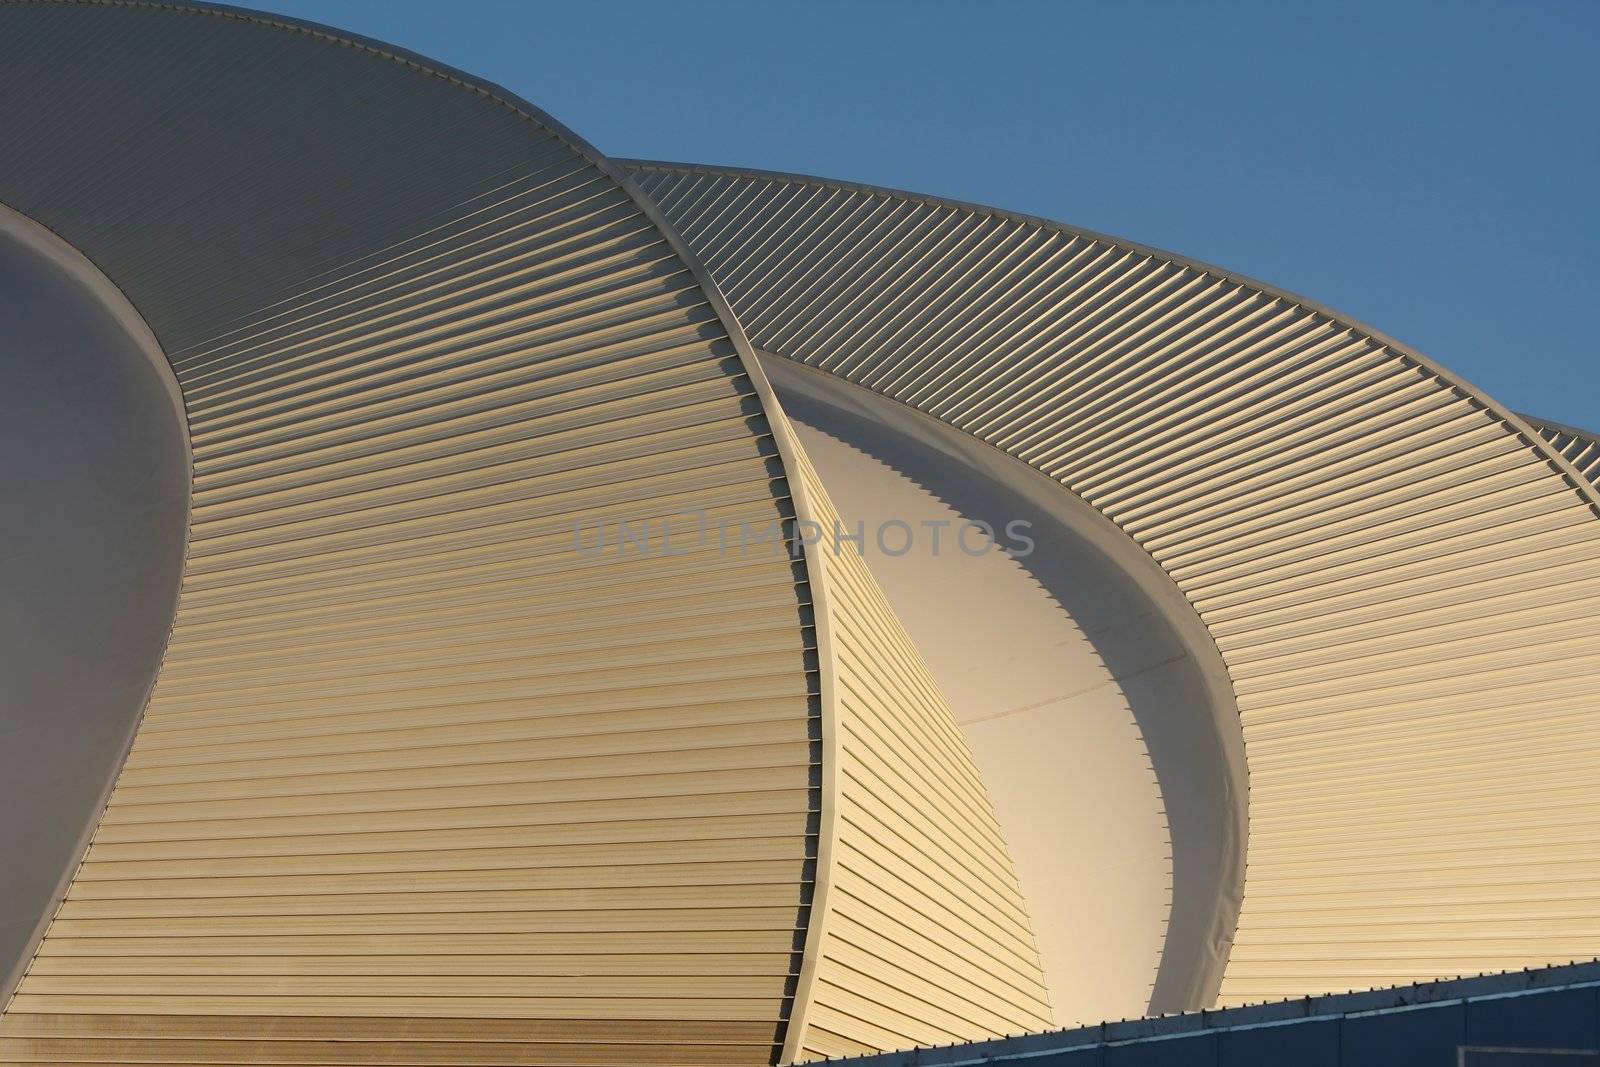 Unique design of roof for world cup soccer stadium in Port Elizabeth, South Africa